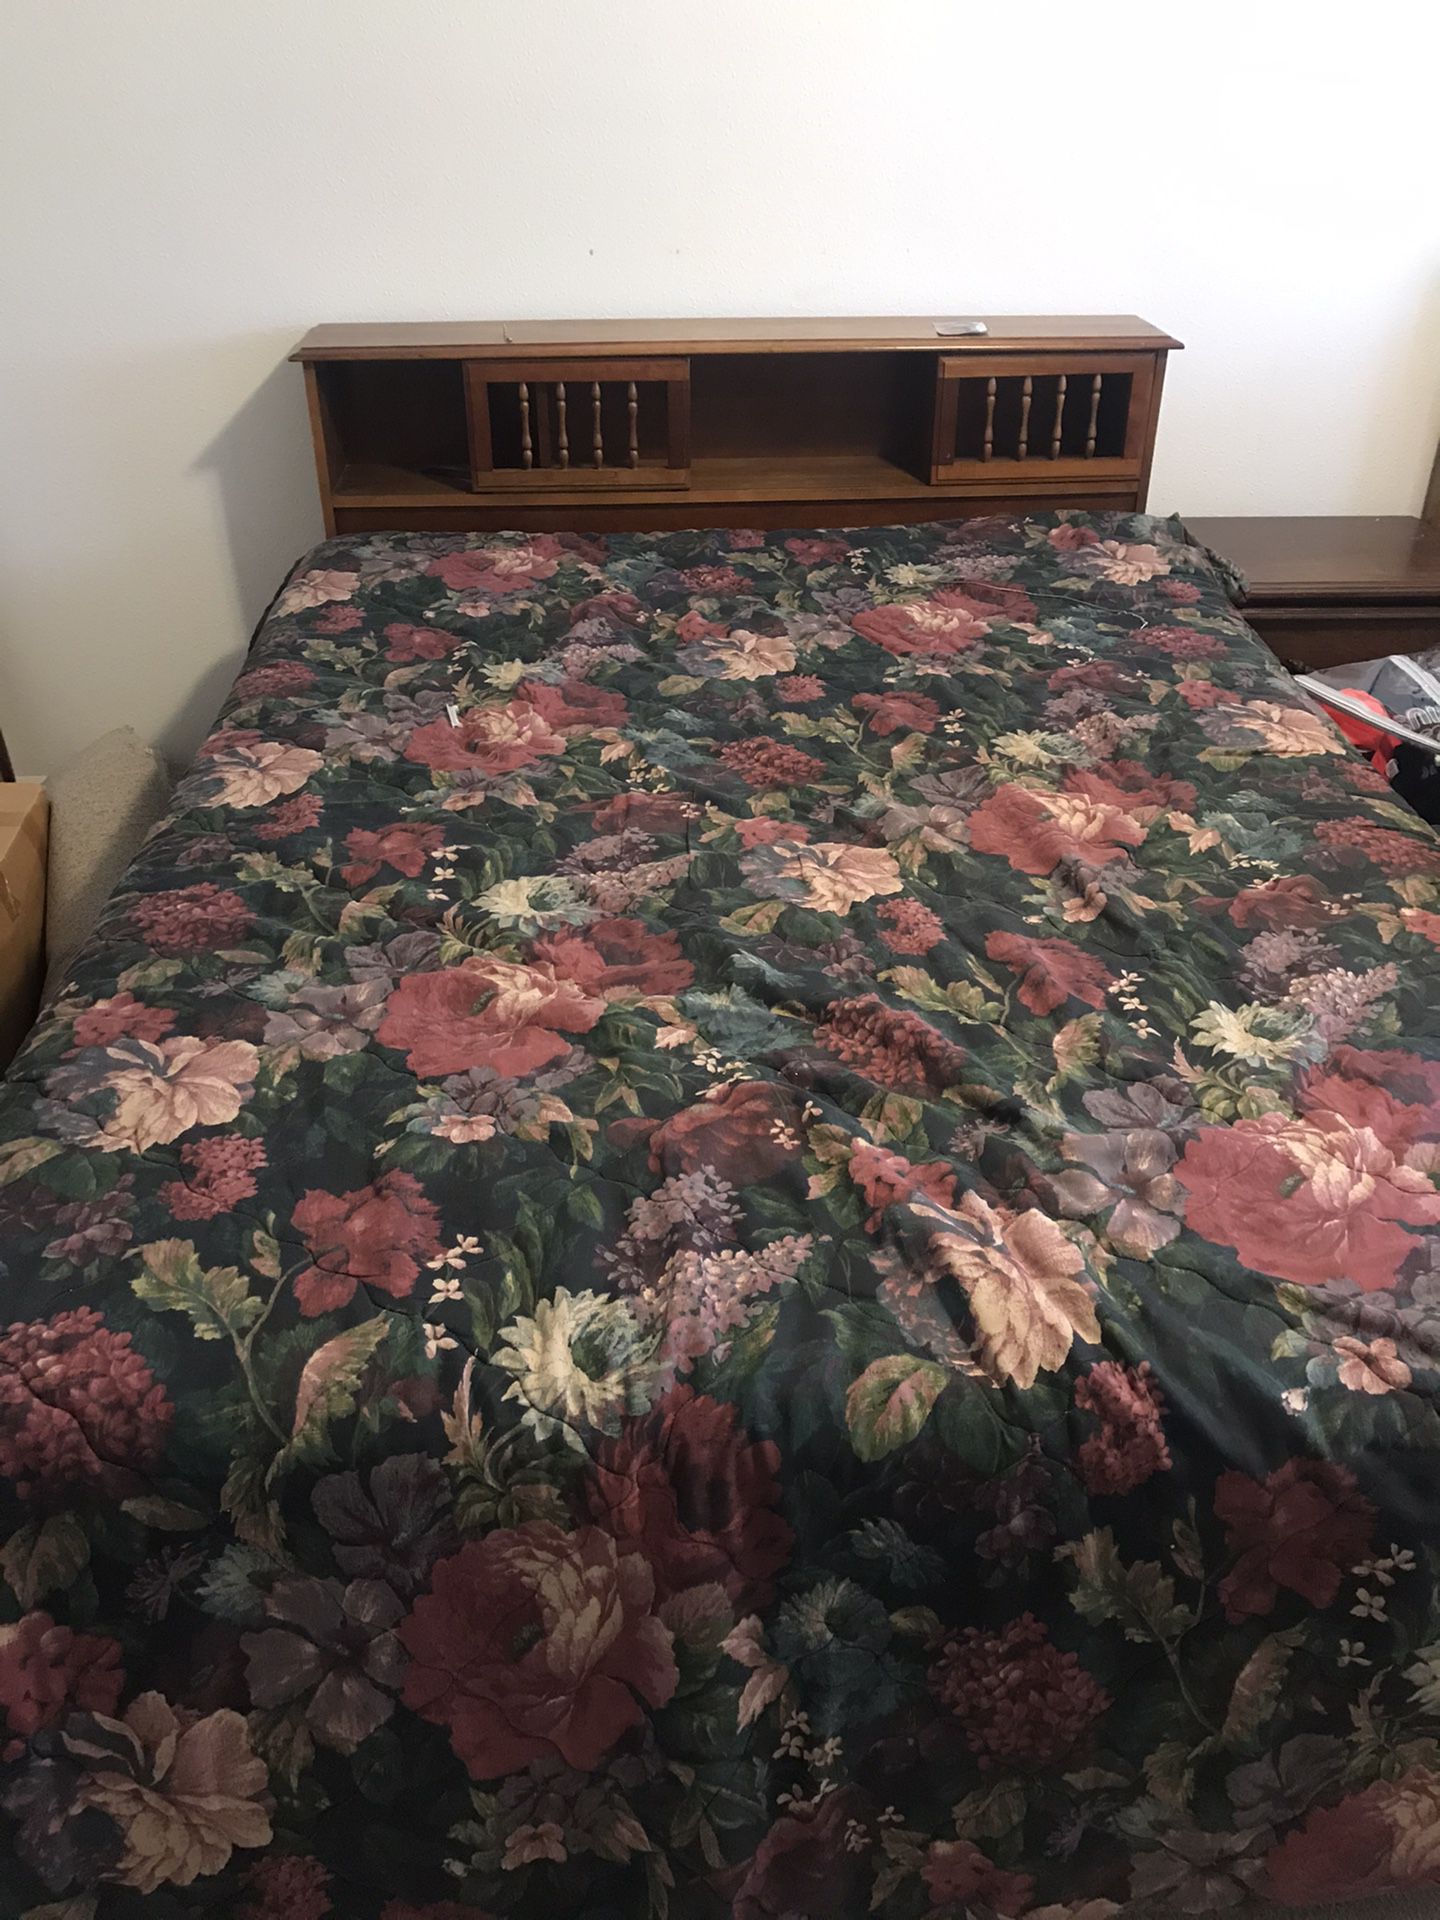 Queen size bed with mattresses and frame.